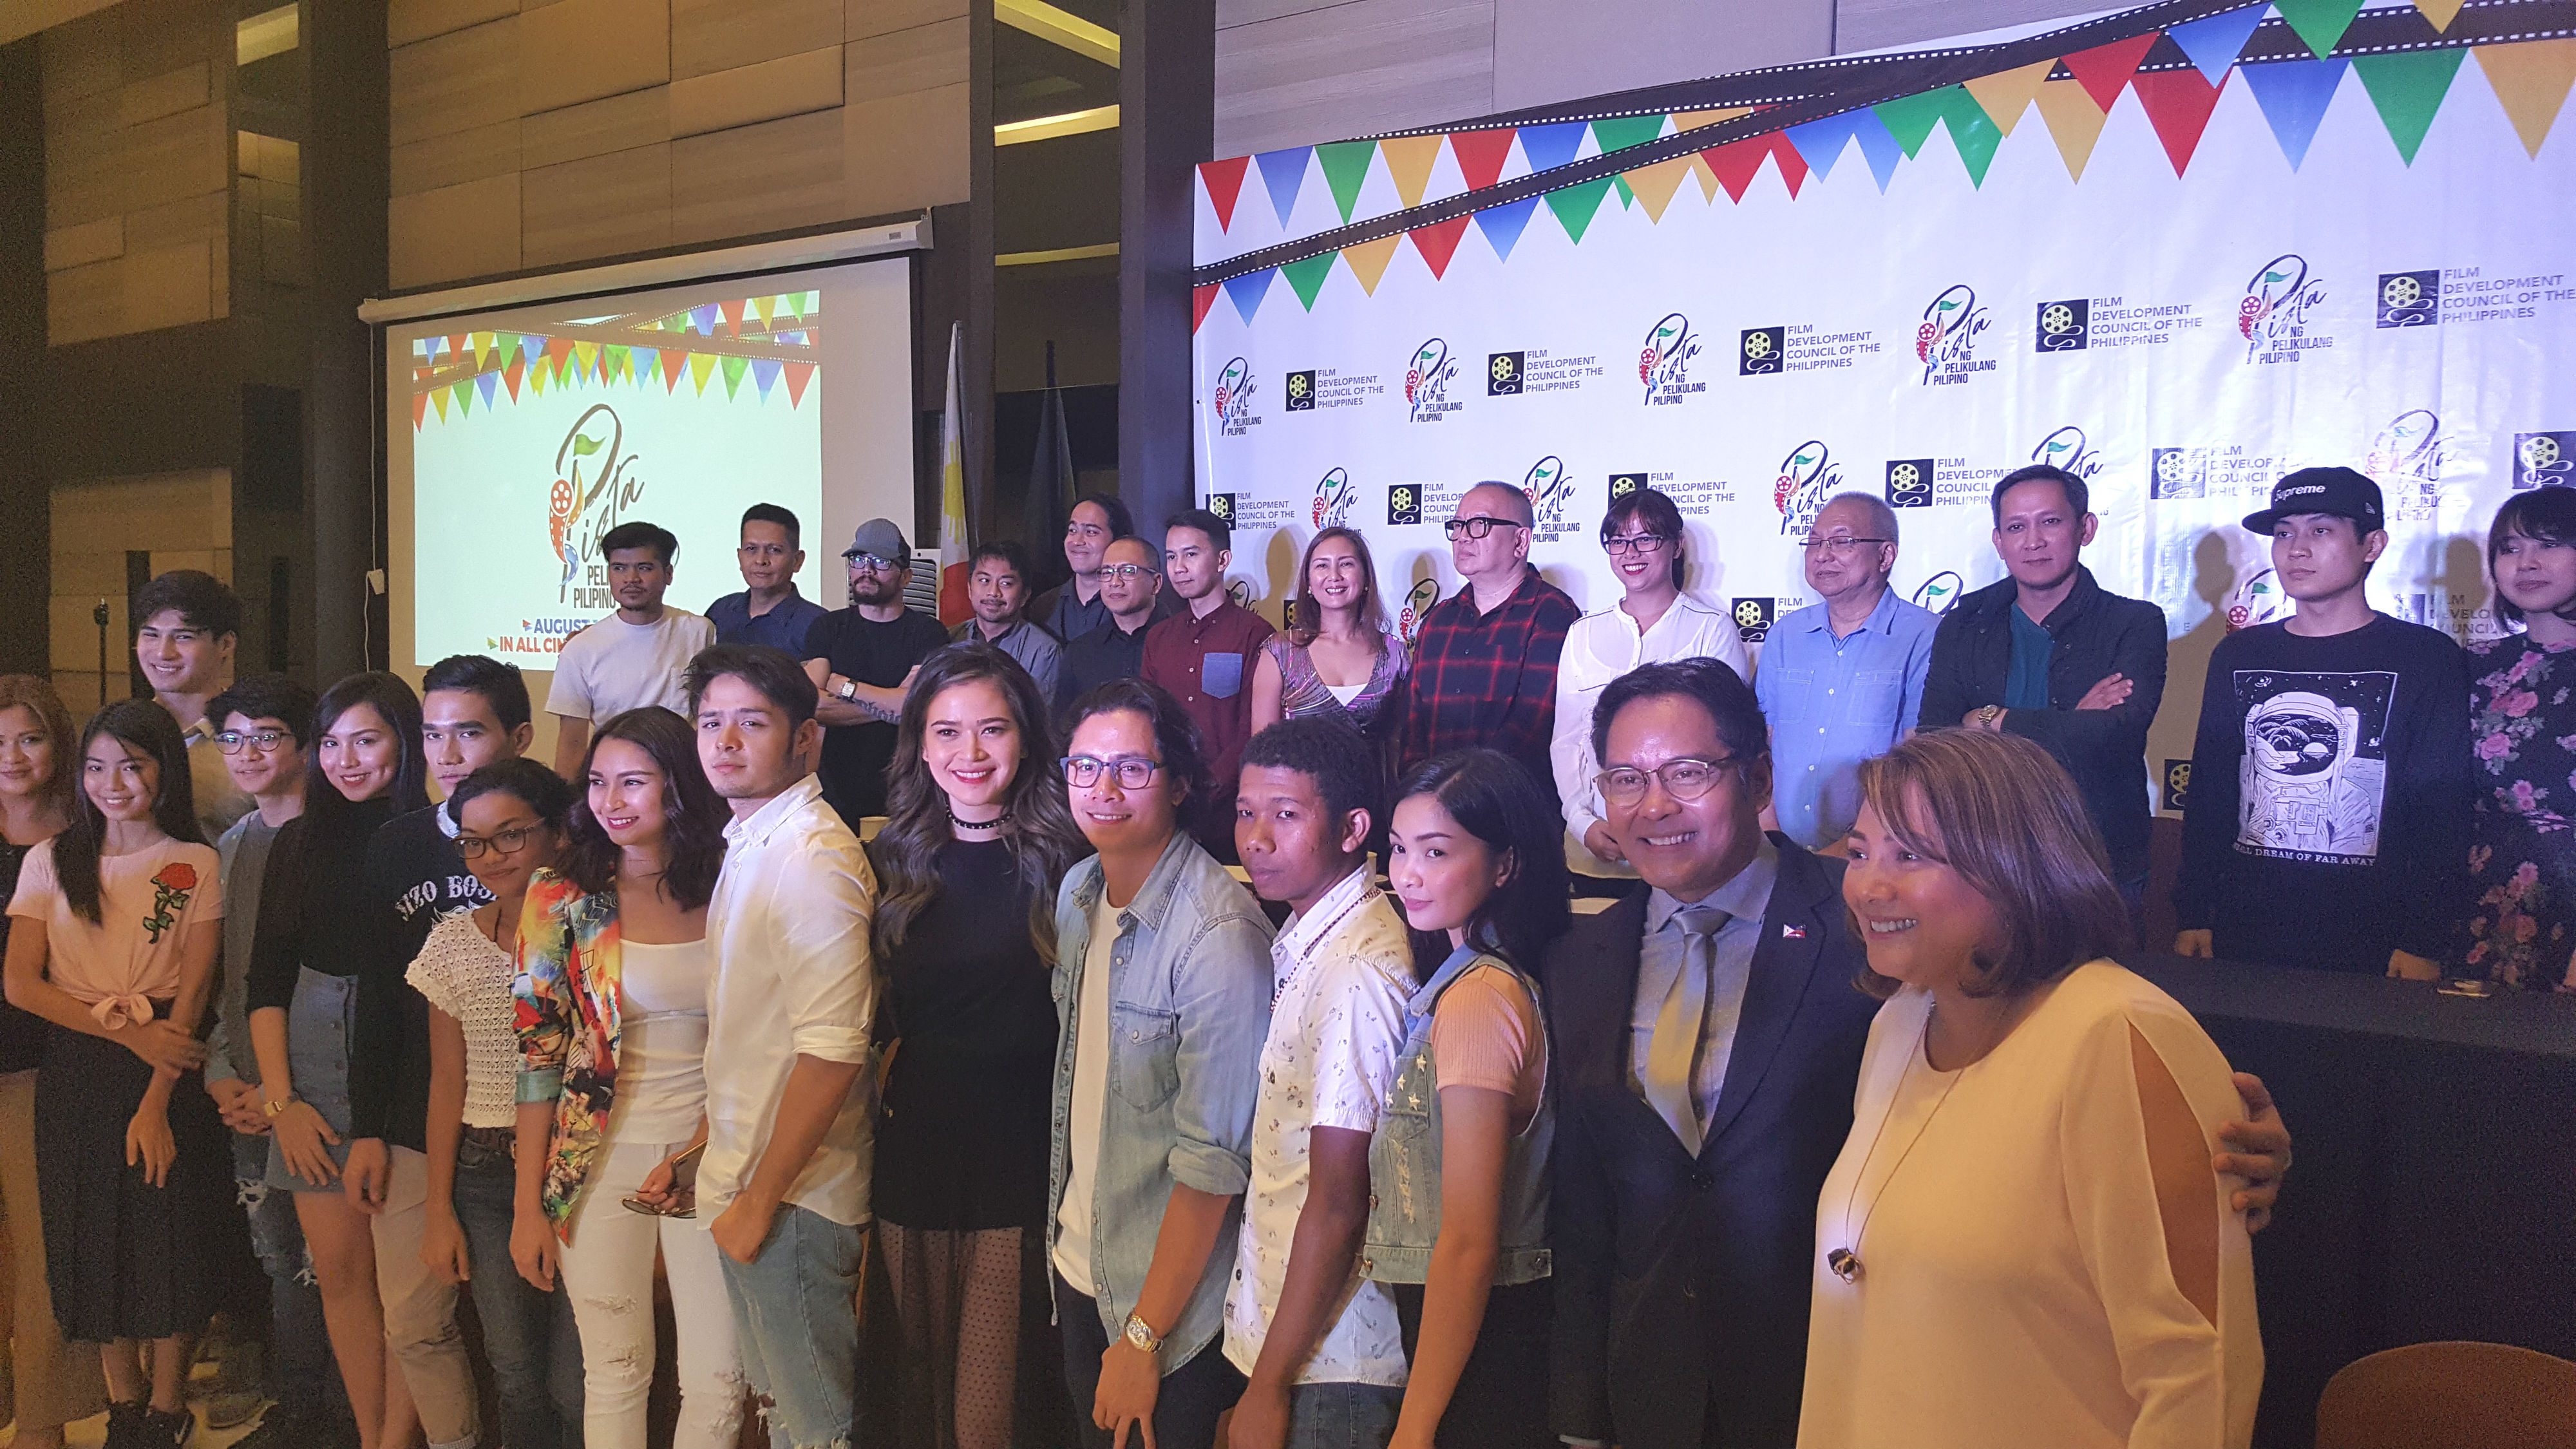 PISTA NG PELIKULANG PILIPINO. The committee, producers, directors, and stars of the film attend the announcement on June 30. Photo by Alexa Villano/Rappler 